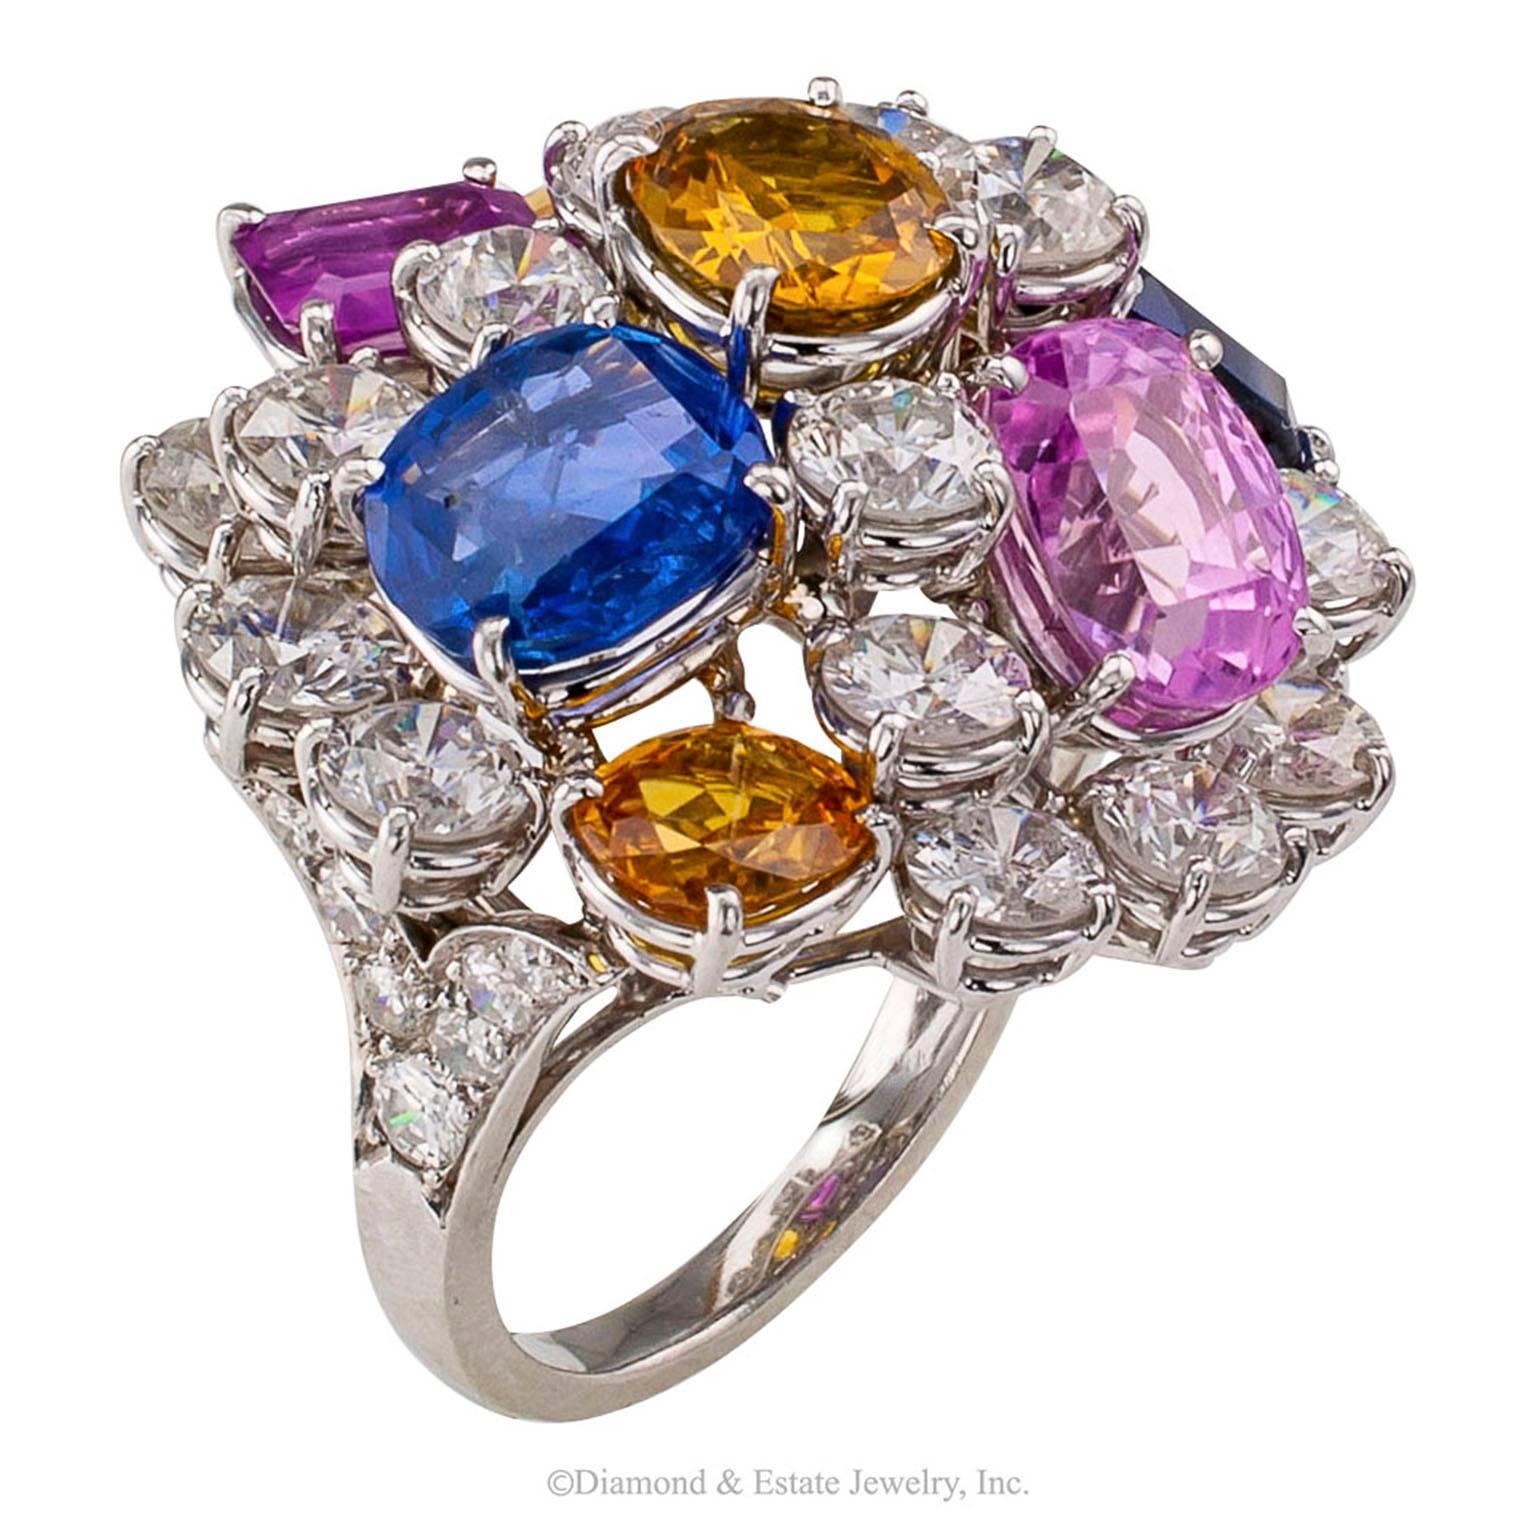 Ruser Diamond Sapphire Platinum Cocktail Ring

1950s Ruser multi colored sapphire and diamond cocktail ring mounted in platinum.  It is grand, colossal, a mountain of large diamonds with boulders of blue, pink and yellow sapphires.  It is said that